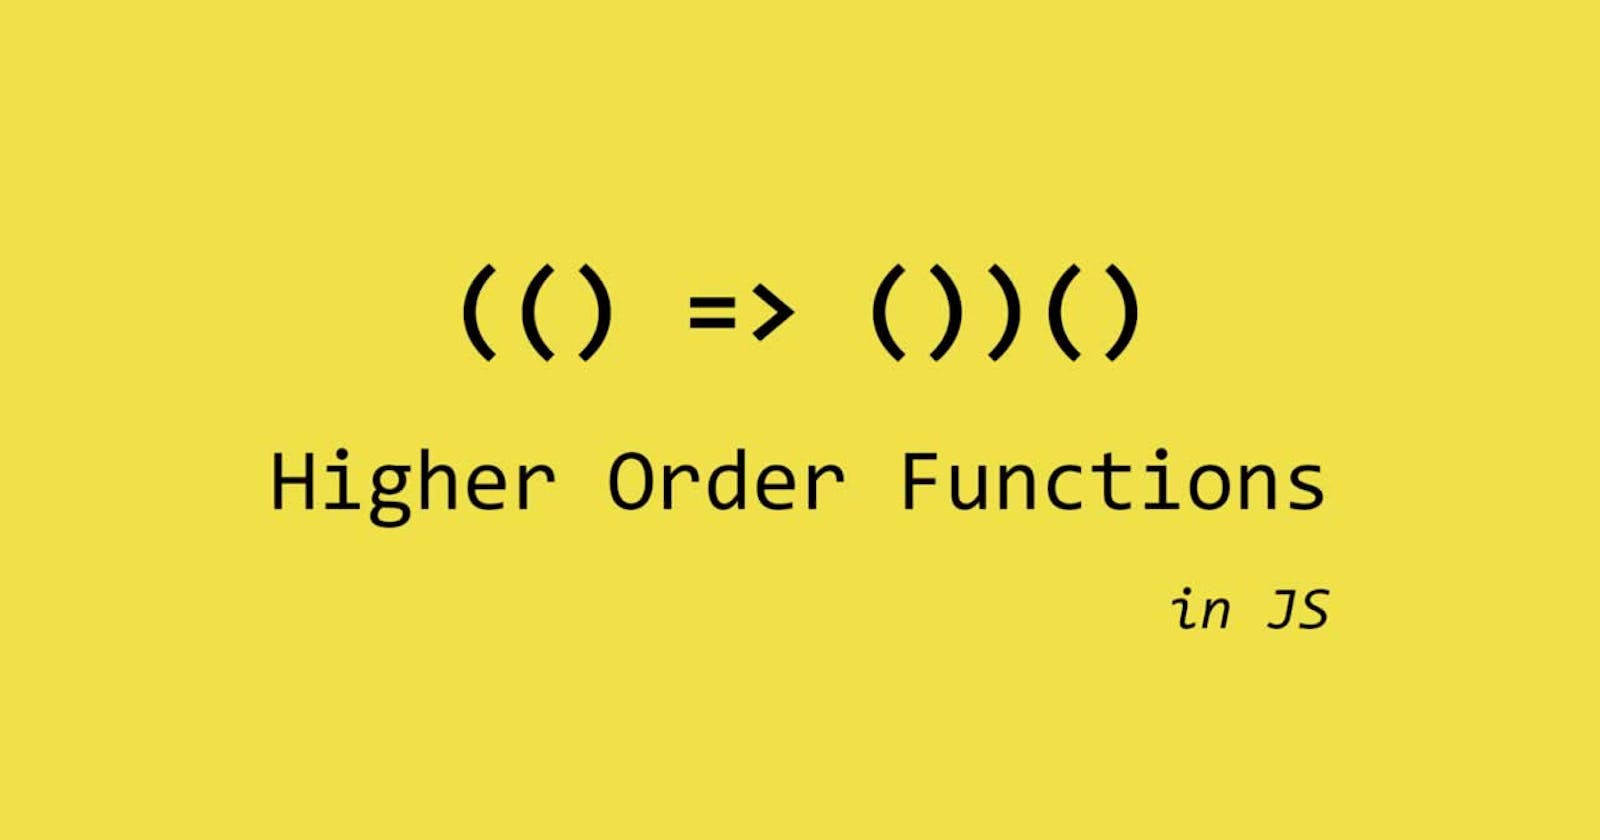 What is Higher Order Function ?